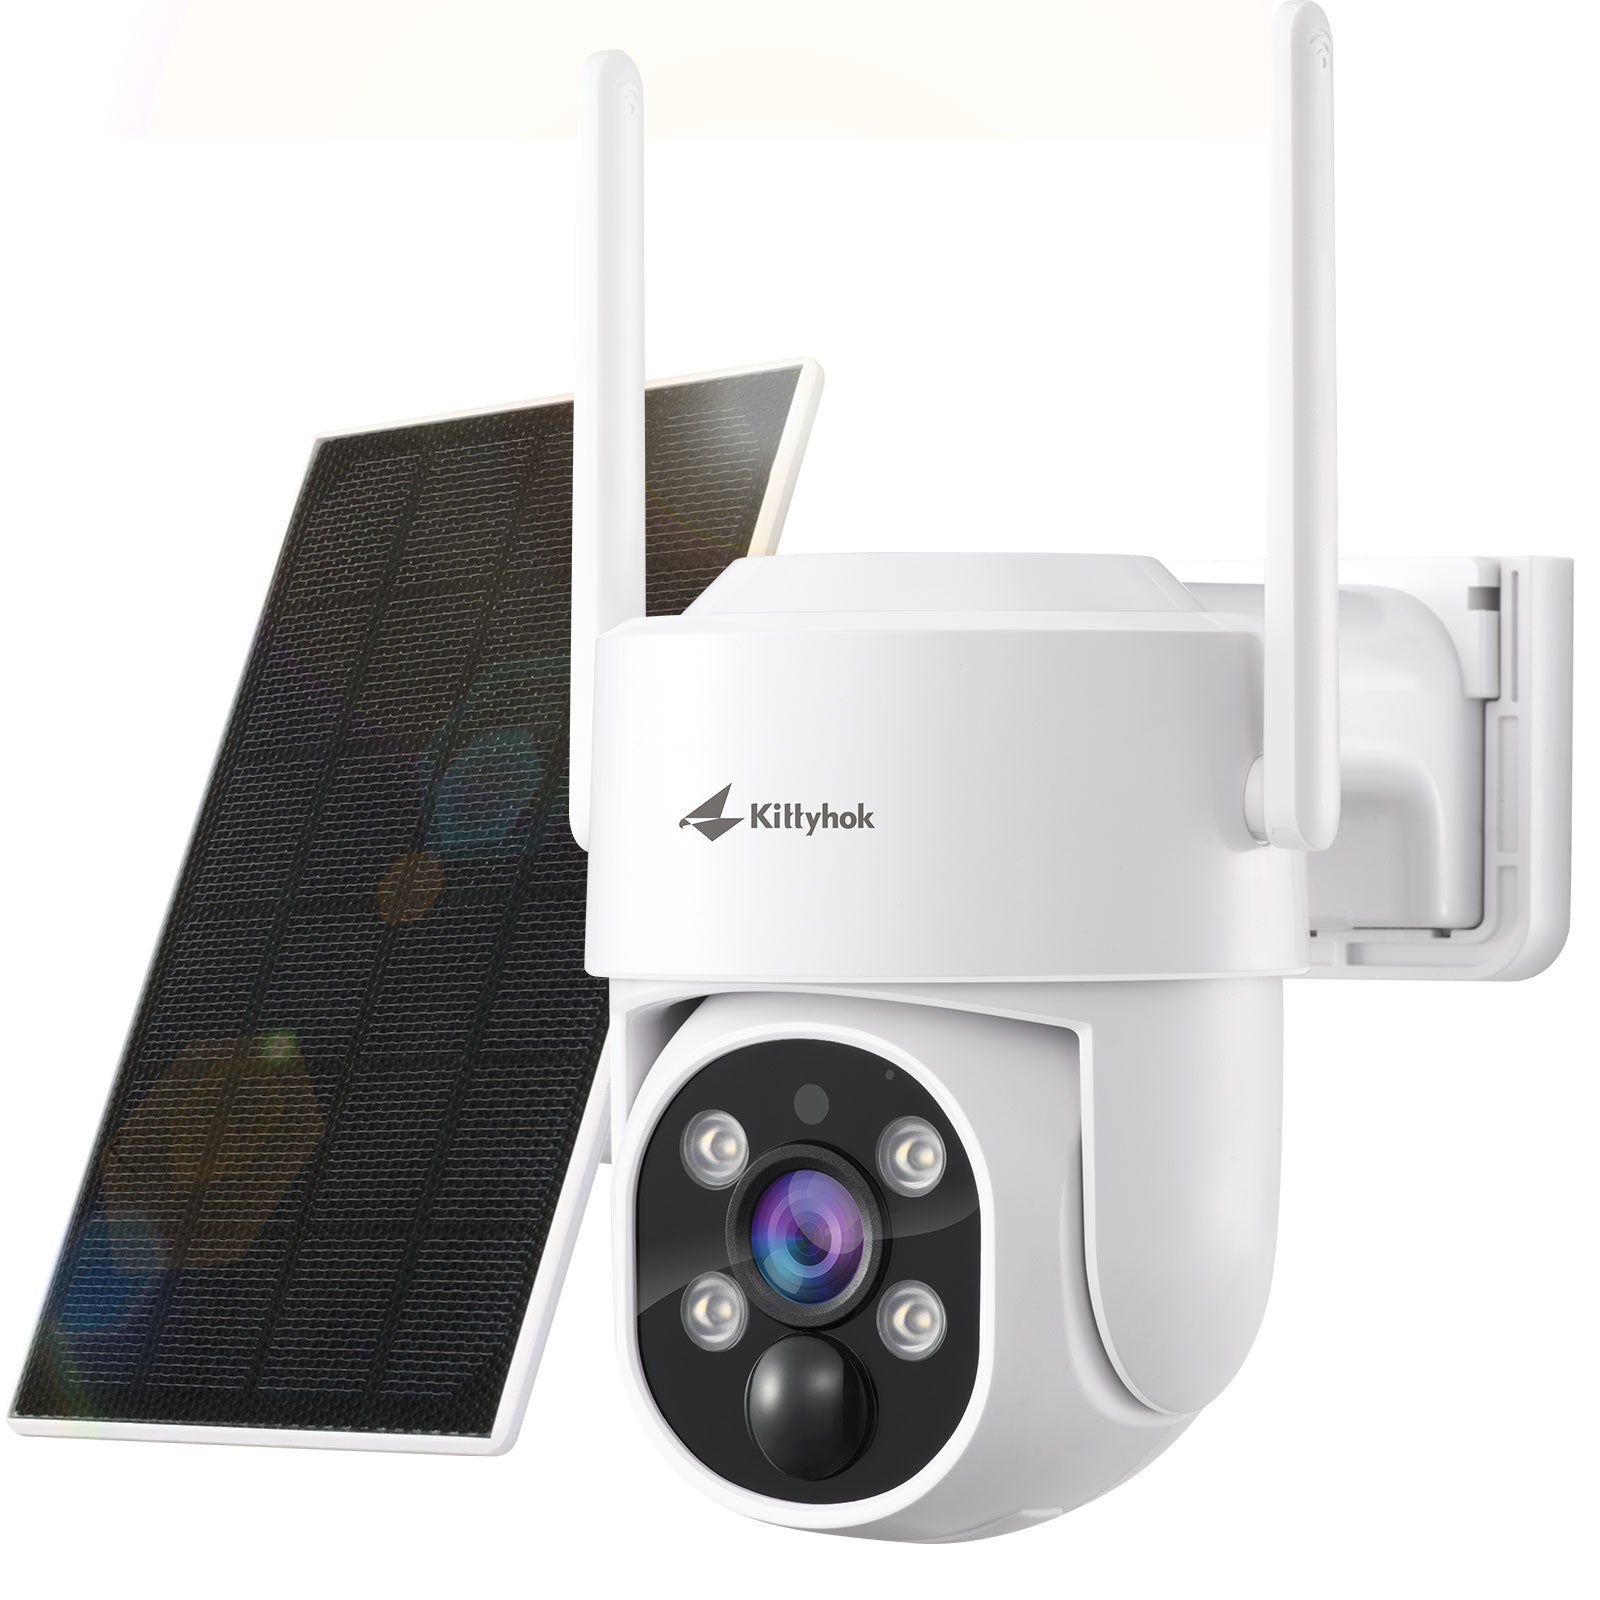 2K FHD Security Camera Wireless Ourdoor, Solar Battery Powered, Color Night Vision, Smart Detection, IP66 Weatherproof